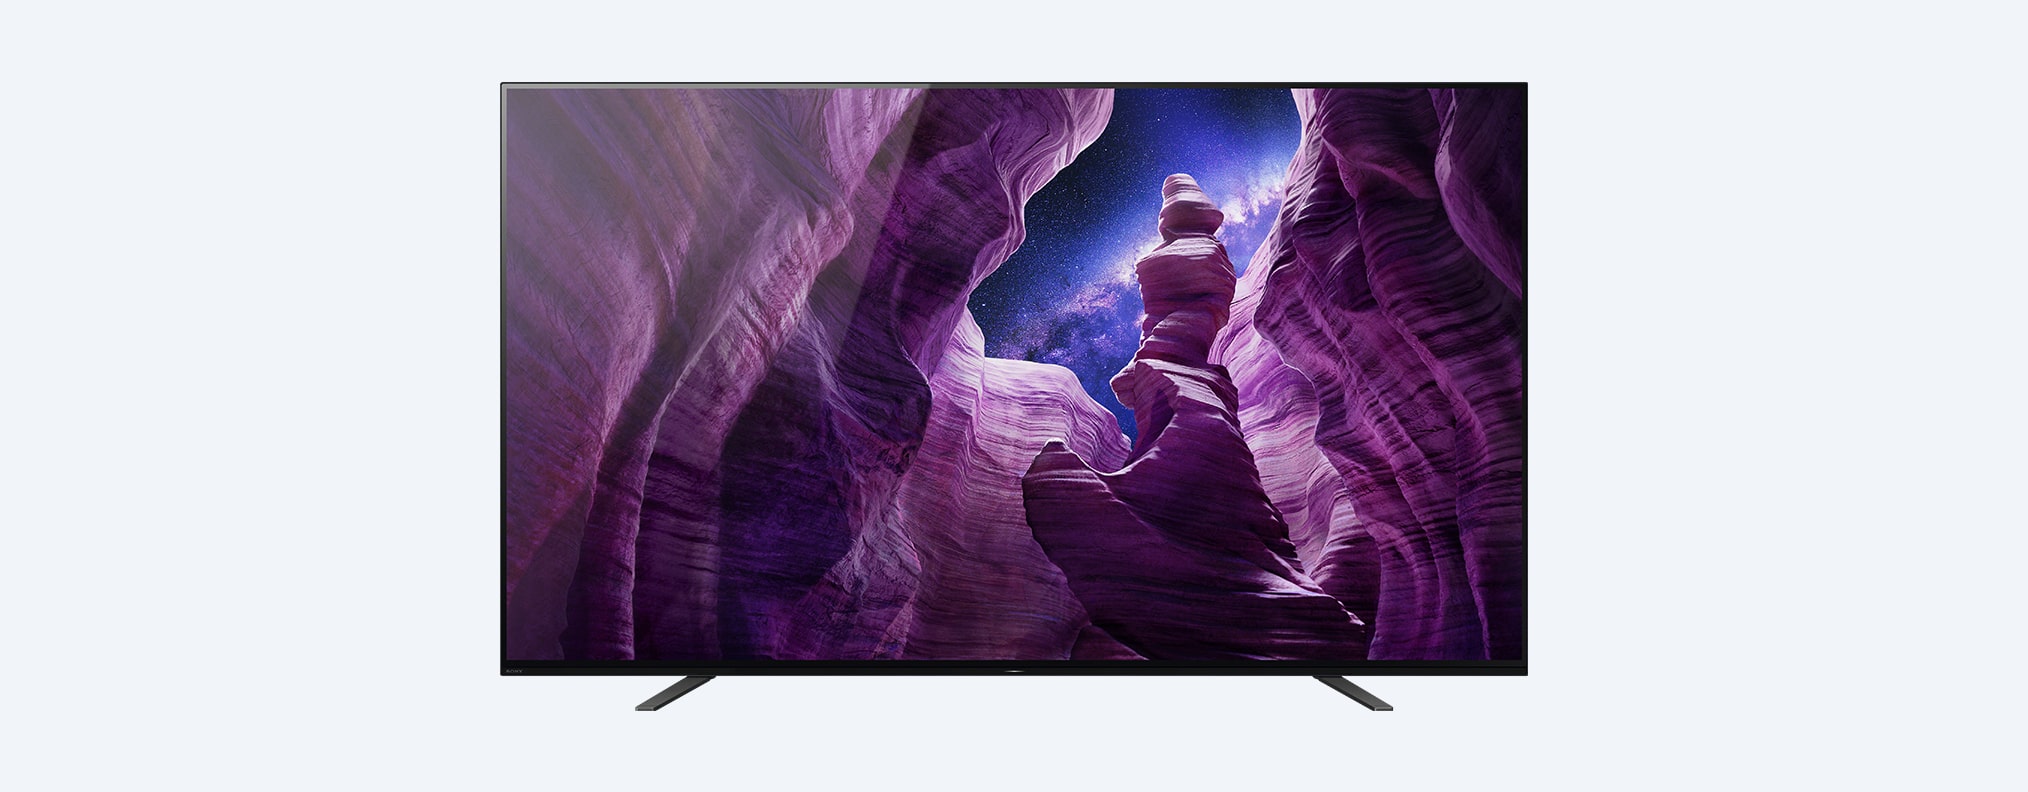 A8 | OLED | 4K Ultra HD | טווח דינמי גבוה (HDR) | Smart TV (Android TV)